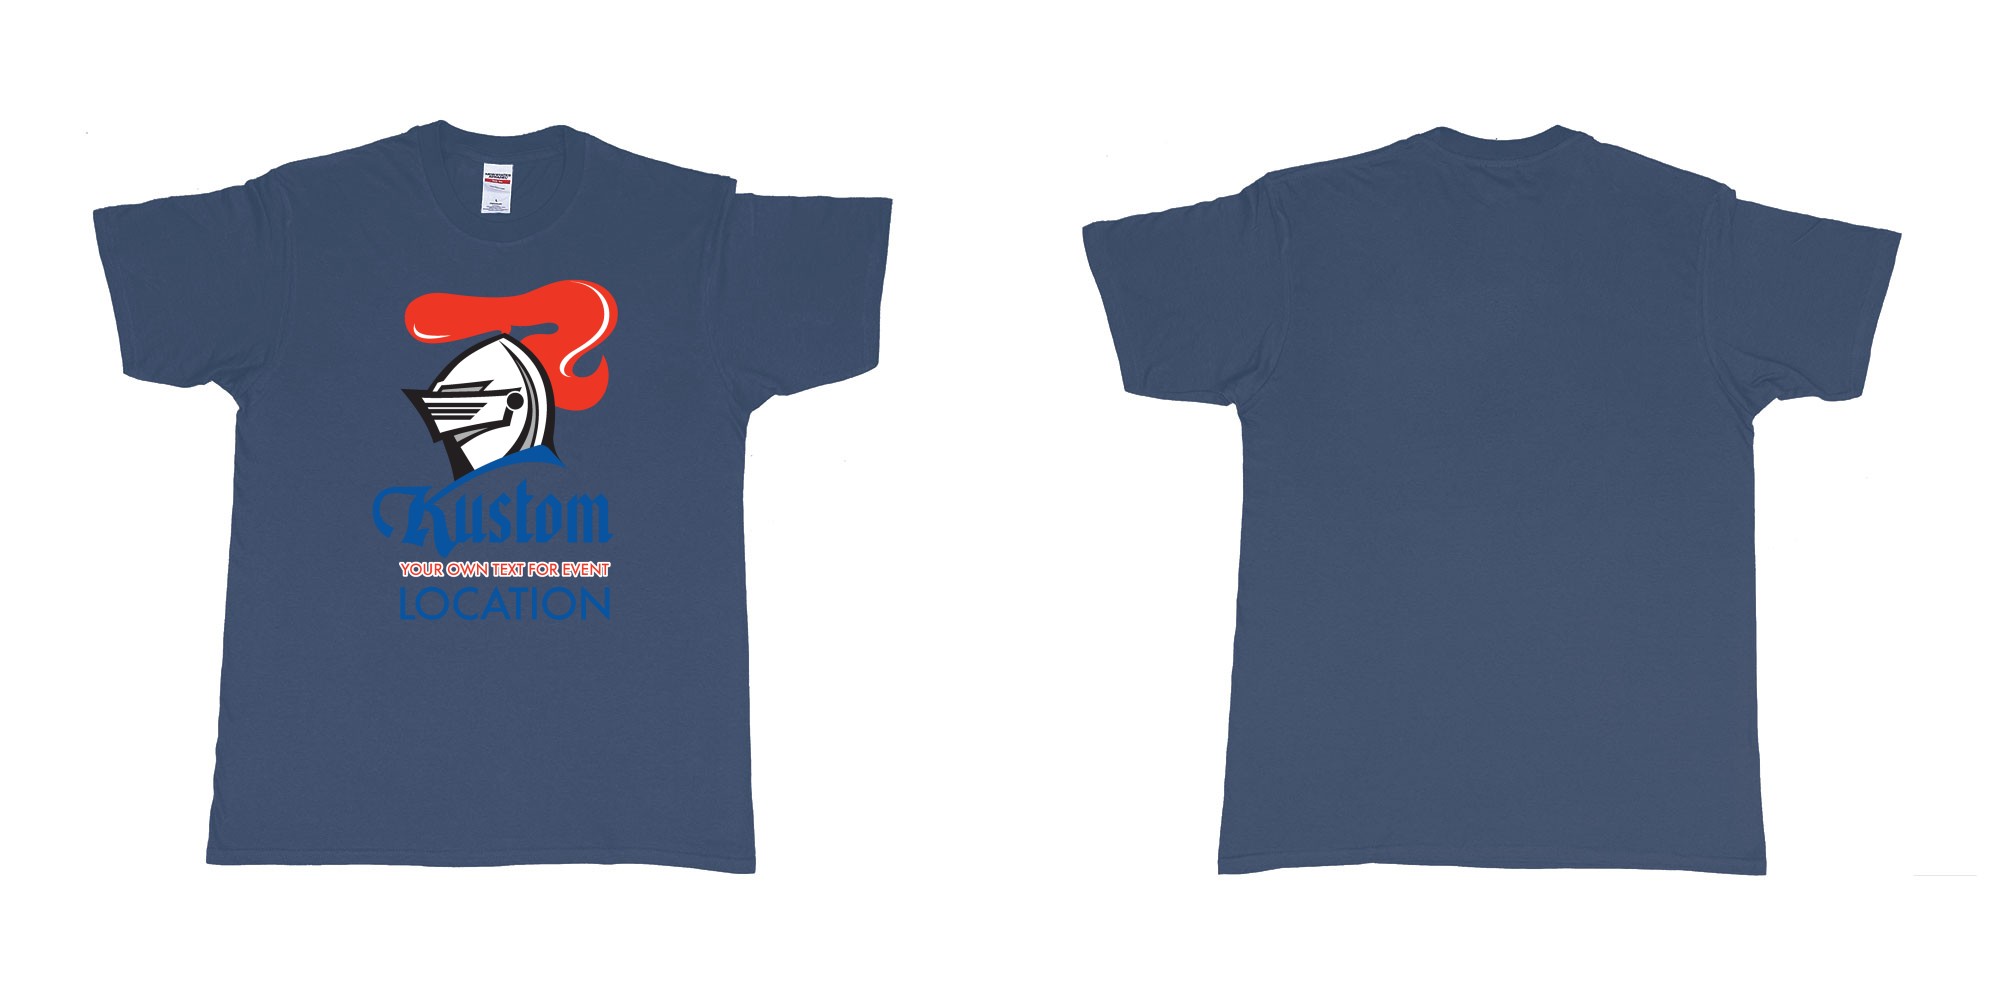 Custom tshirt design newcastle knights rugby league team custom event teeshirt in fabric color navy choice your own text made in Bali by The Pirate Way